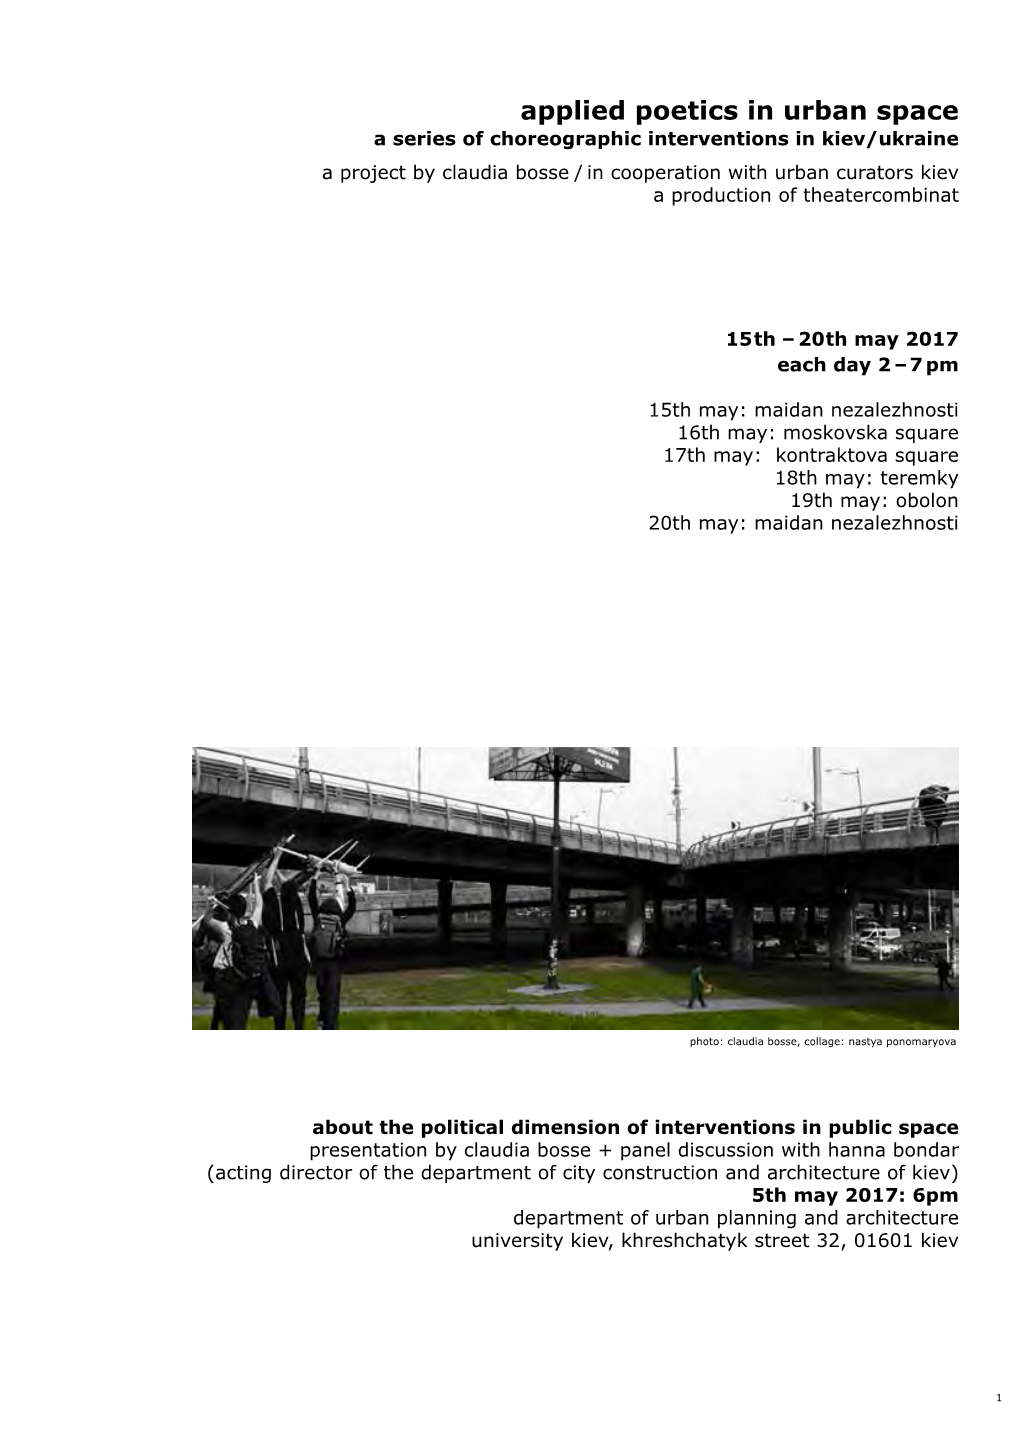 Applied Poetics in Urban Space